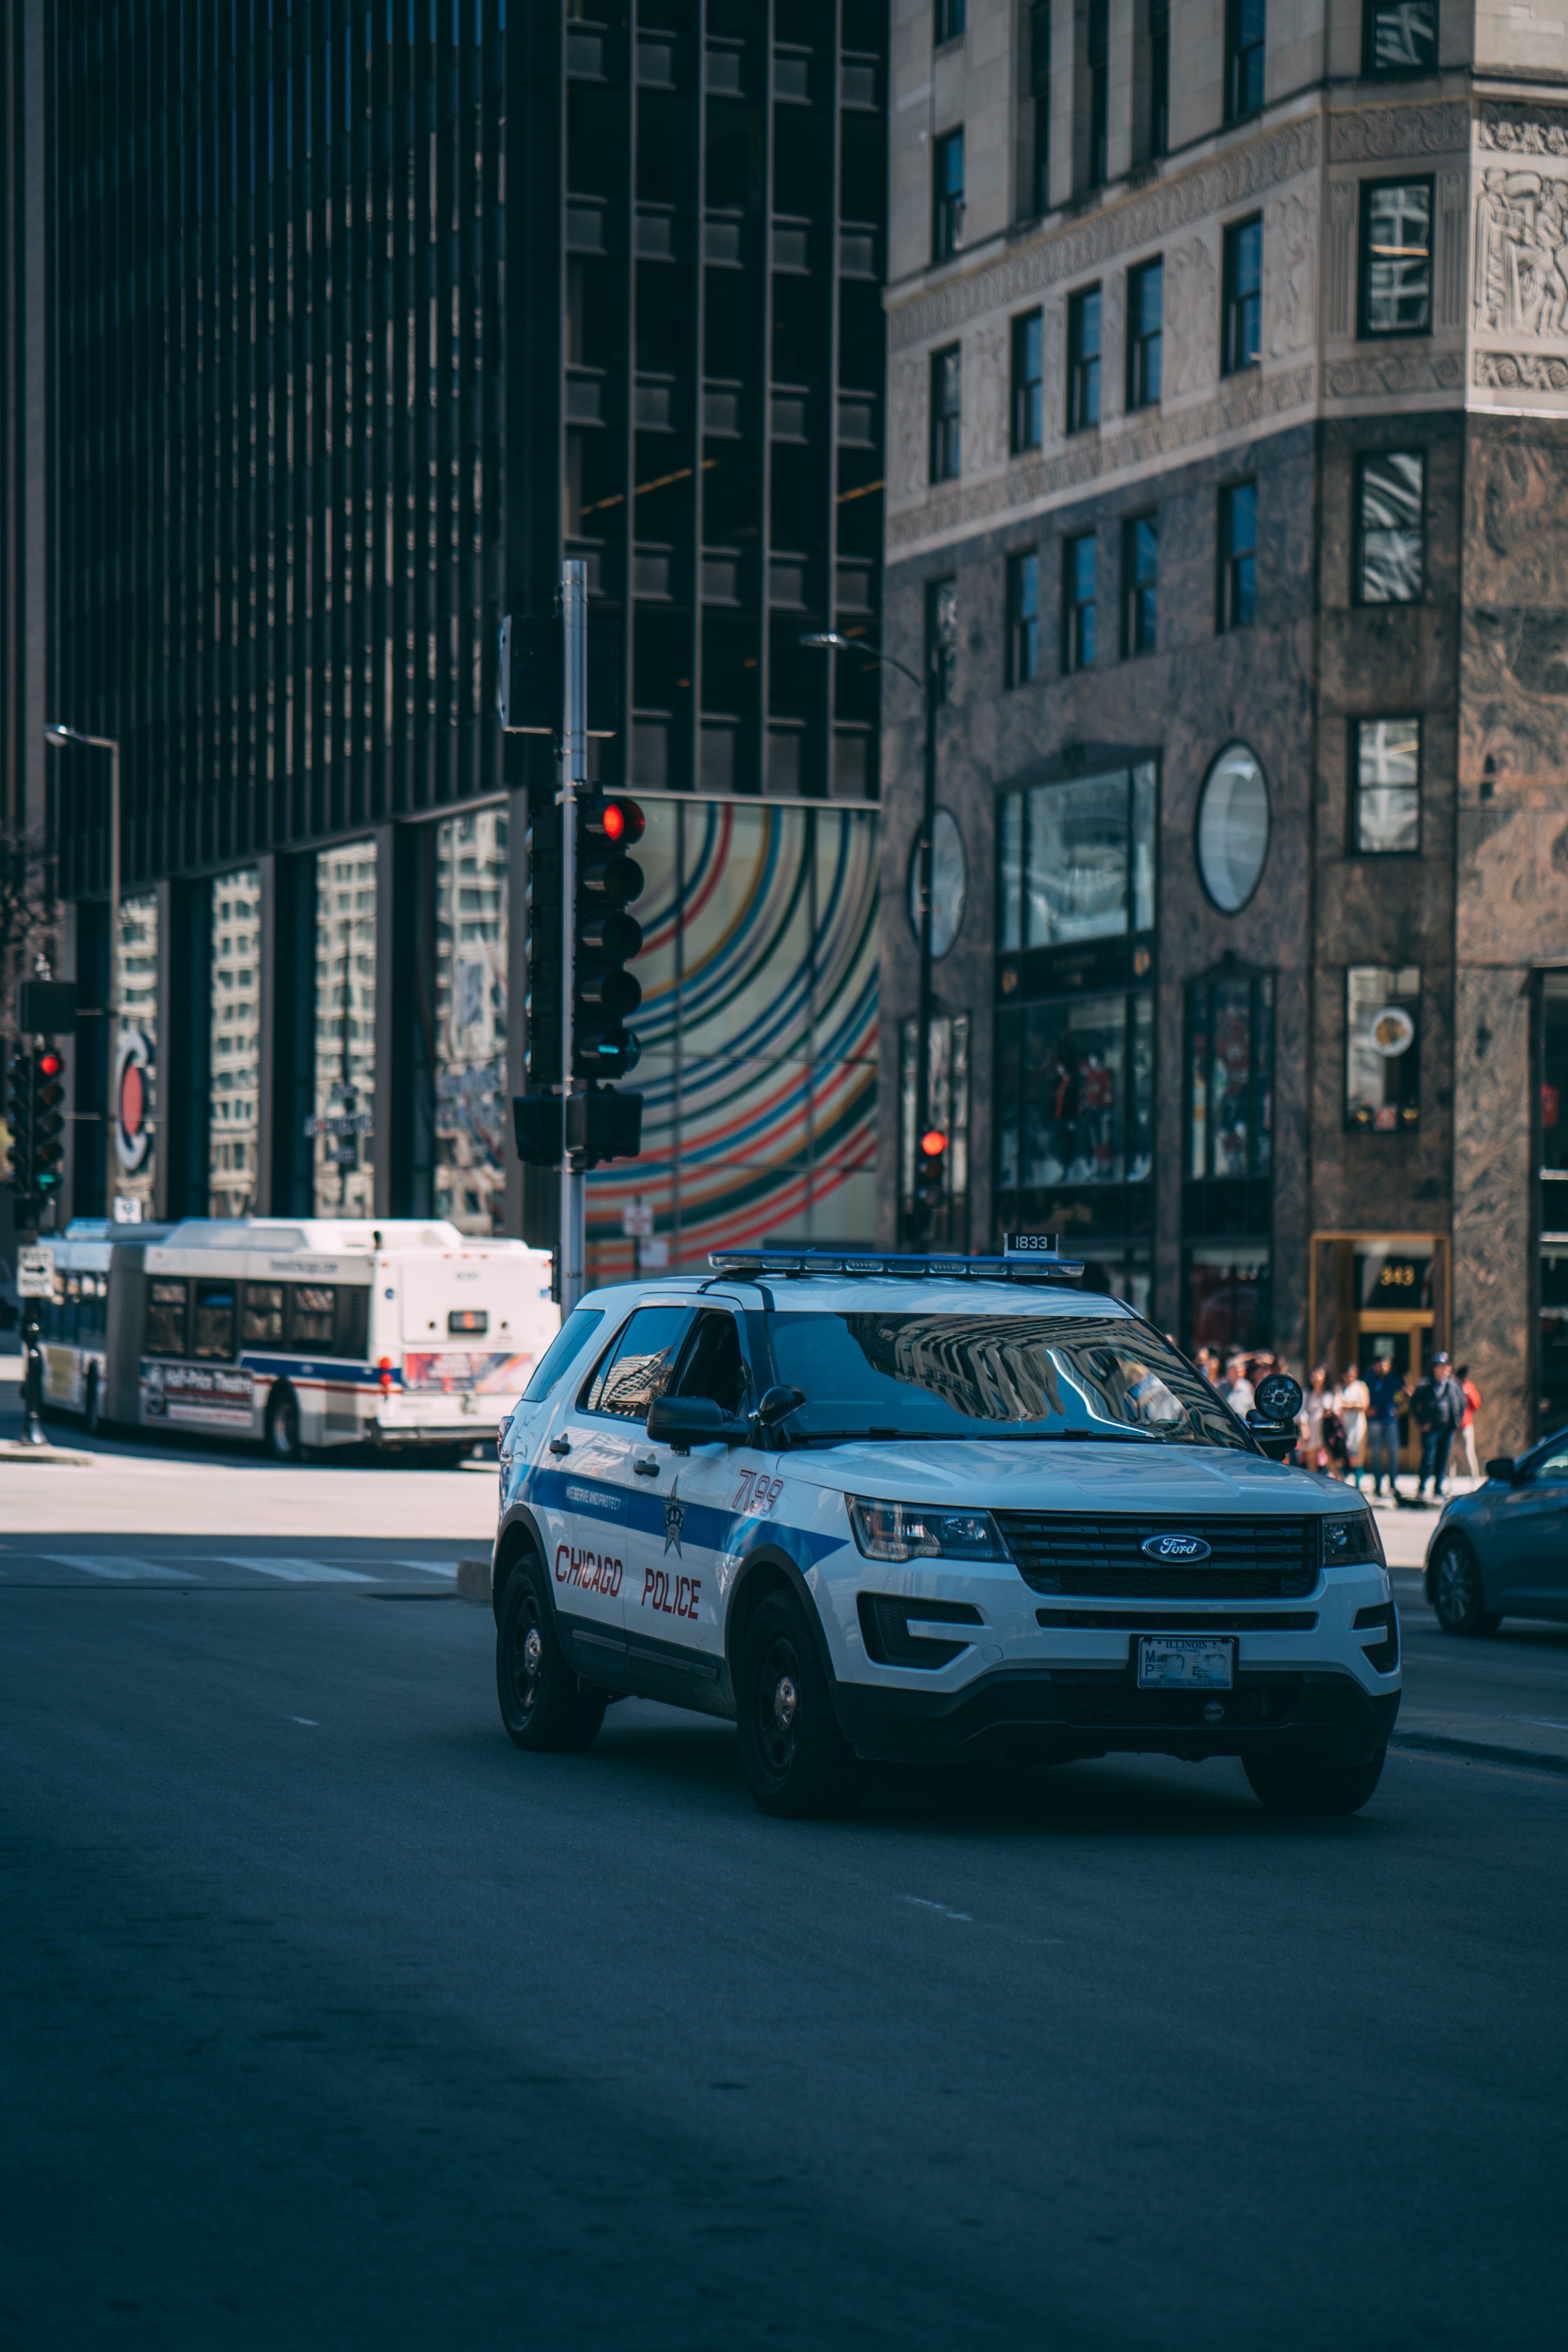 Pictured - A white police SUV passing by in the city | Pexels  